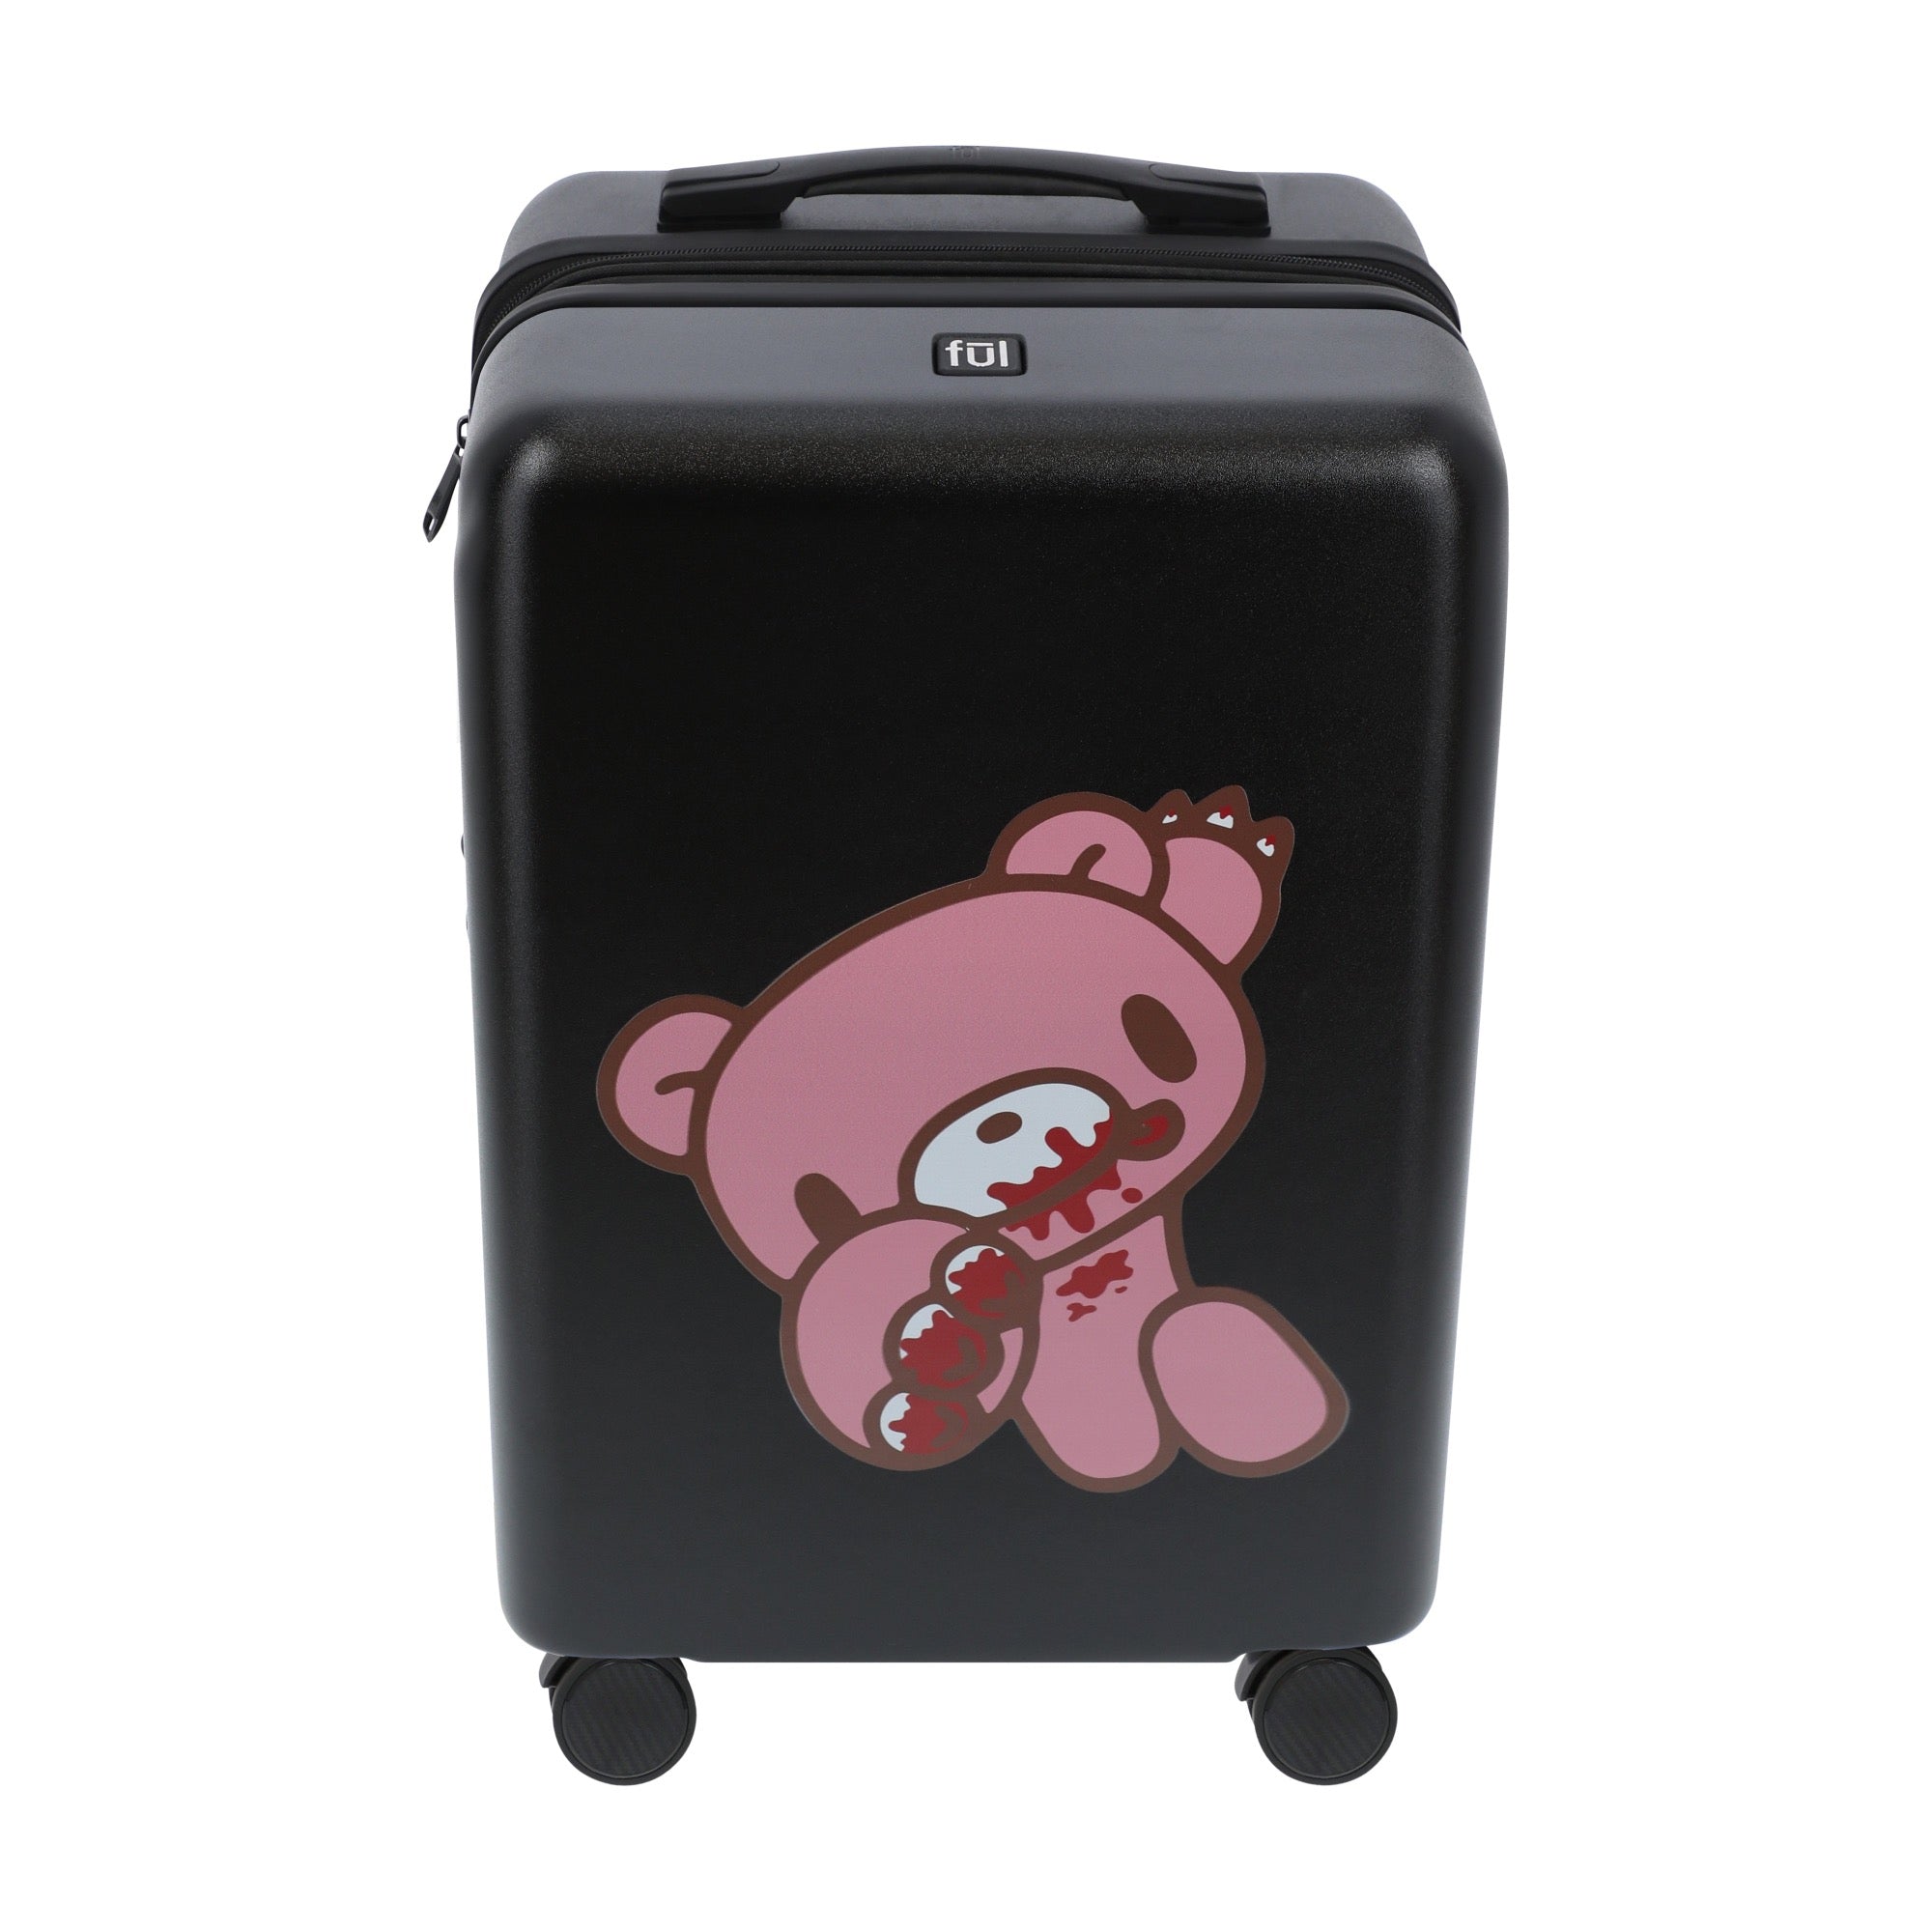 Black octas gloomy bear 22.5" carry-on spinner suitcase luggage by Ful